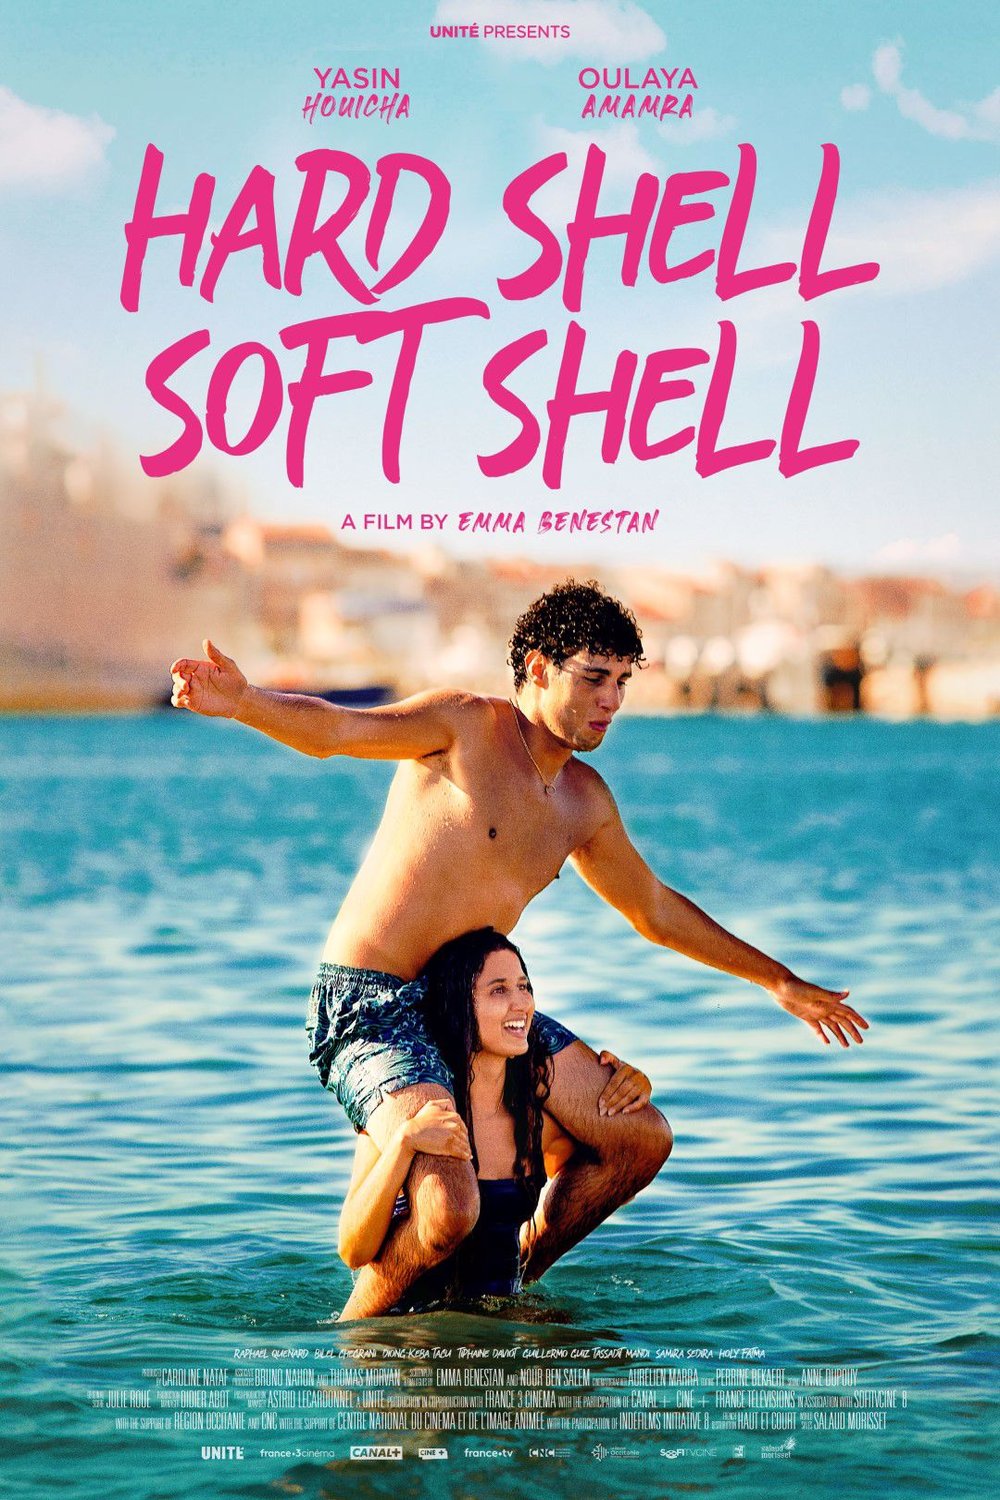 Poster of the movie Hard Shell, Soft Shell